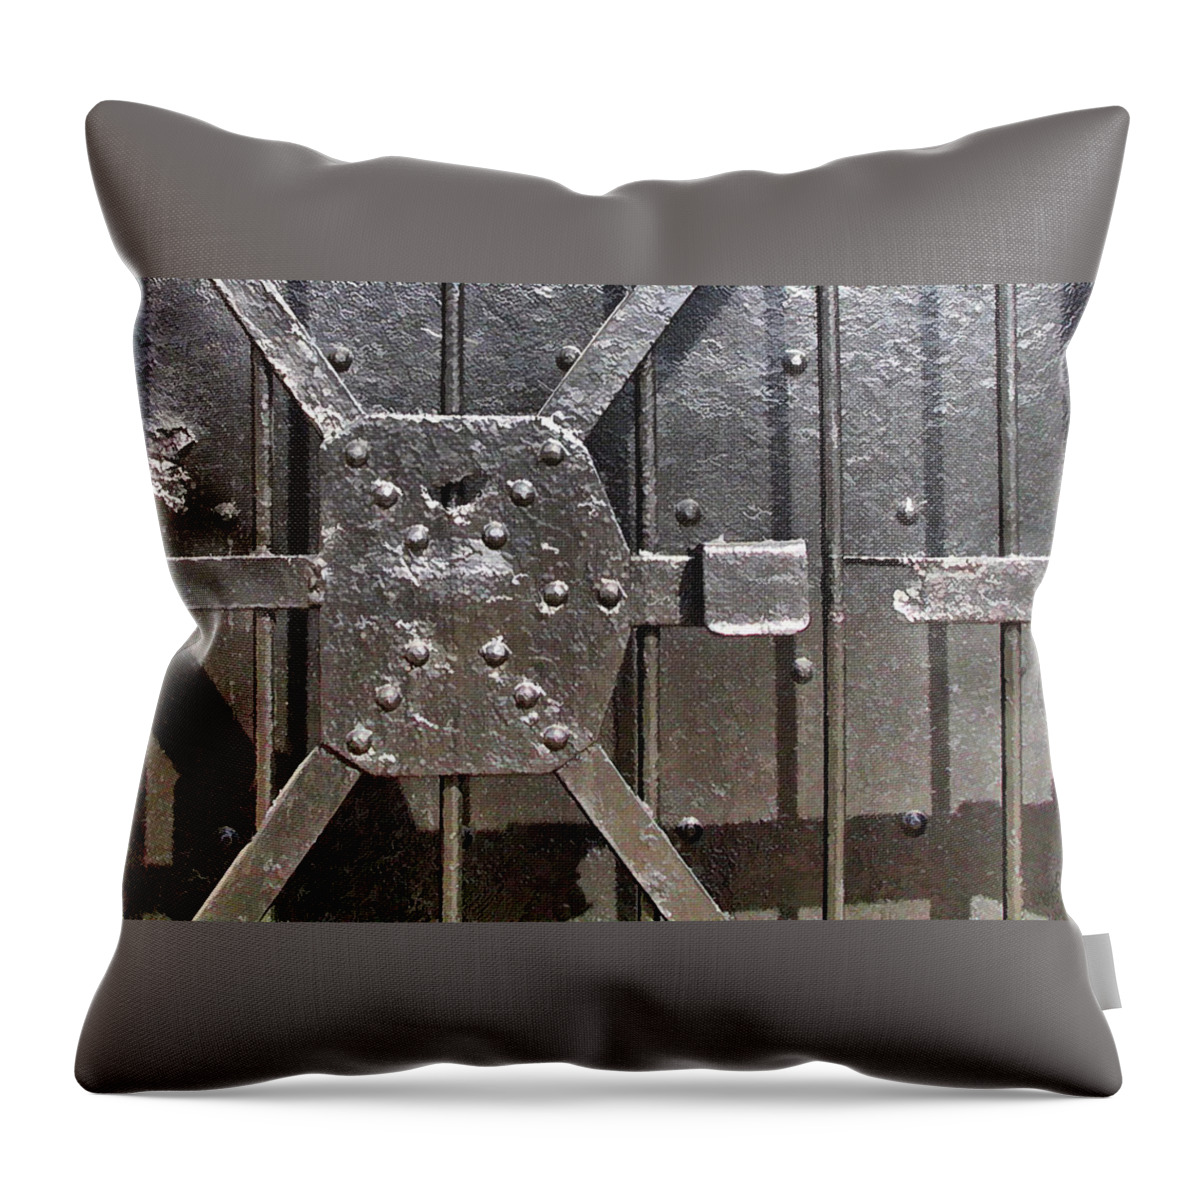 Sandy Hook Throw Pillow featuring the photograph Security Breach At The Bunker by Gary Slawsky